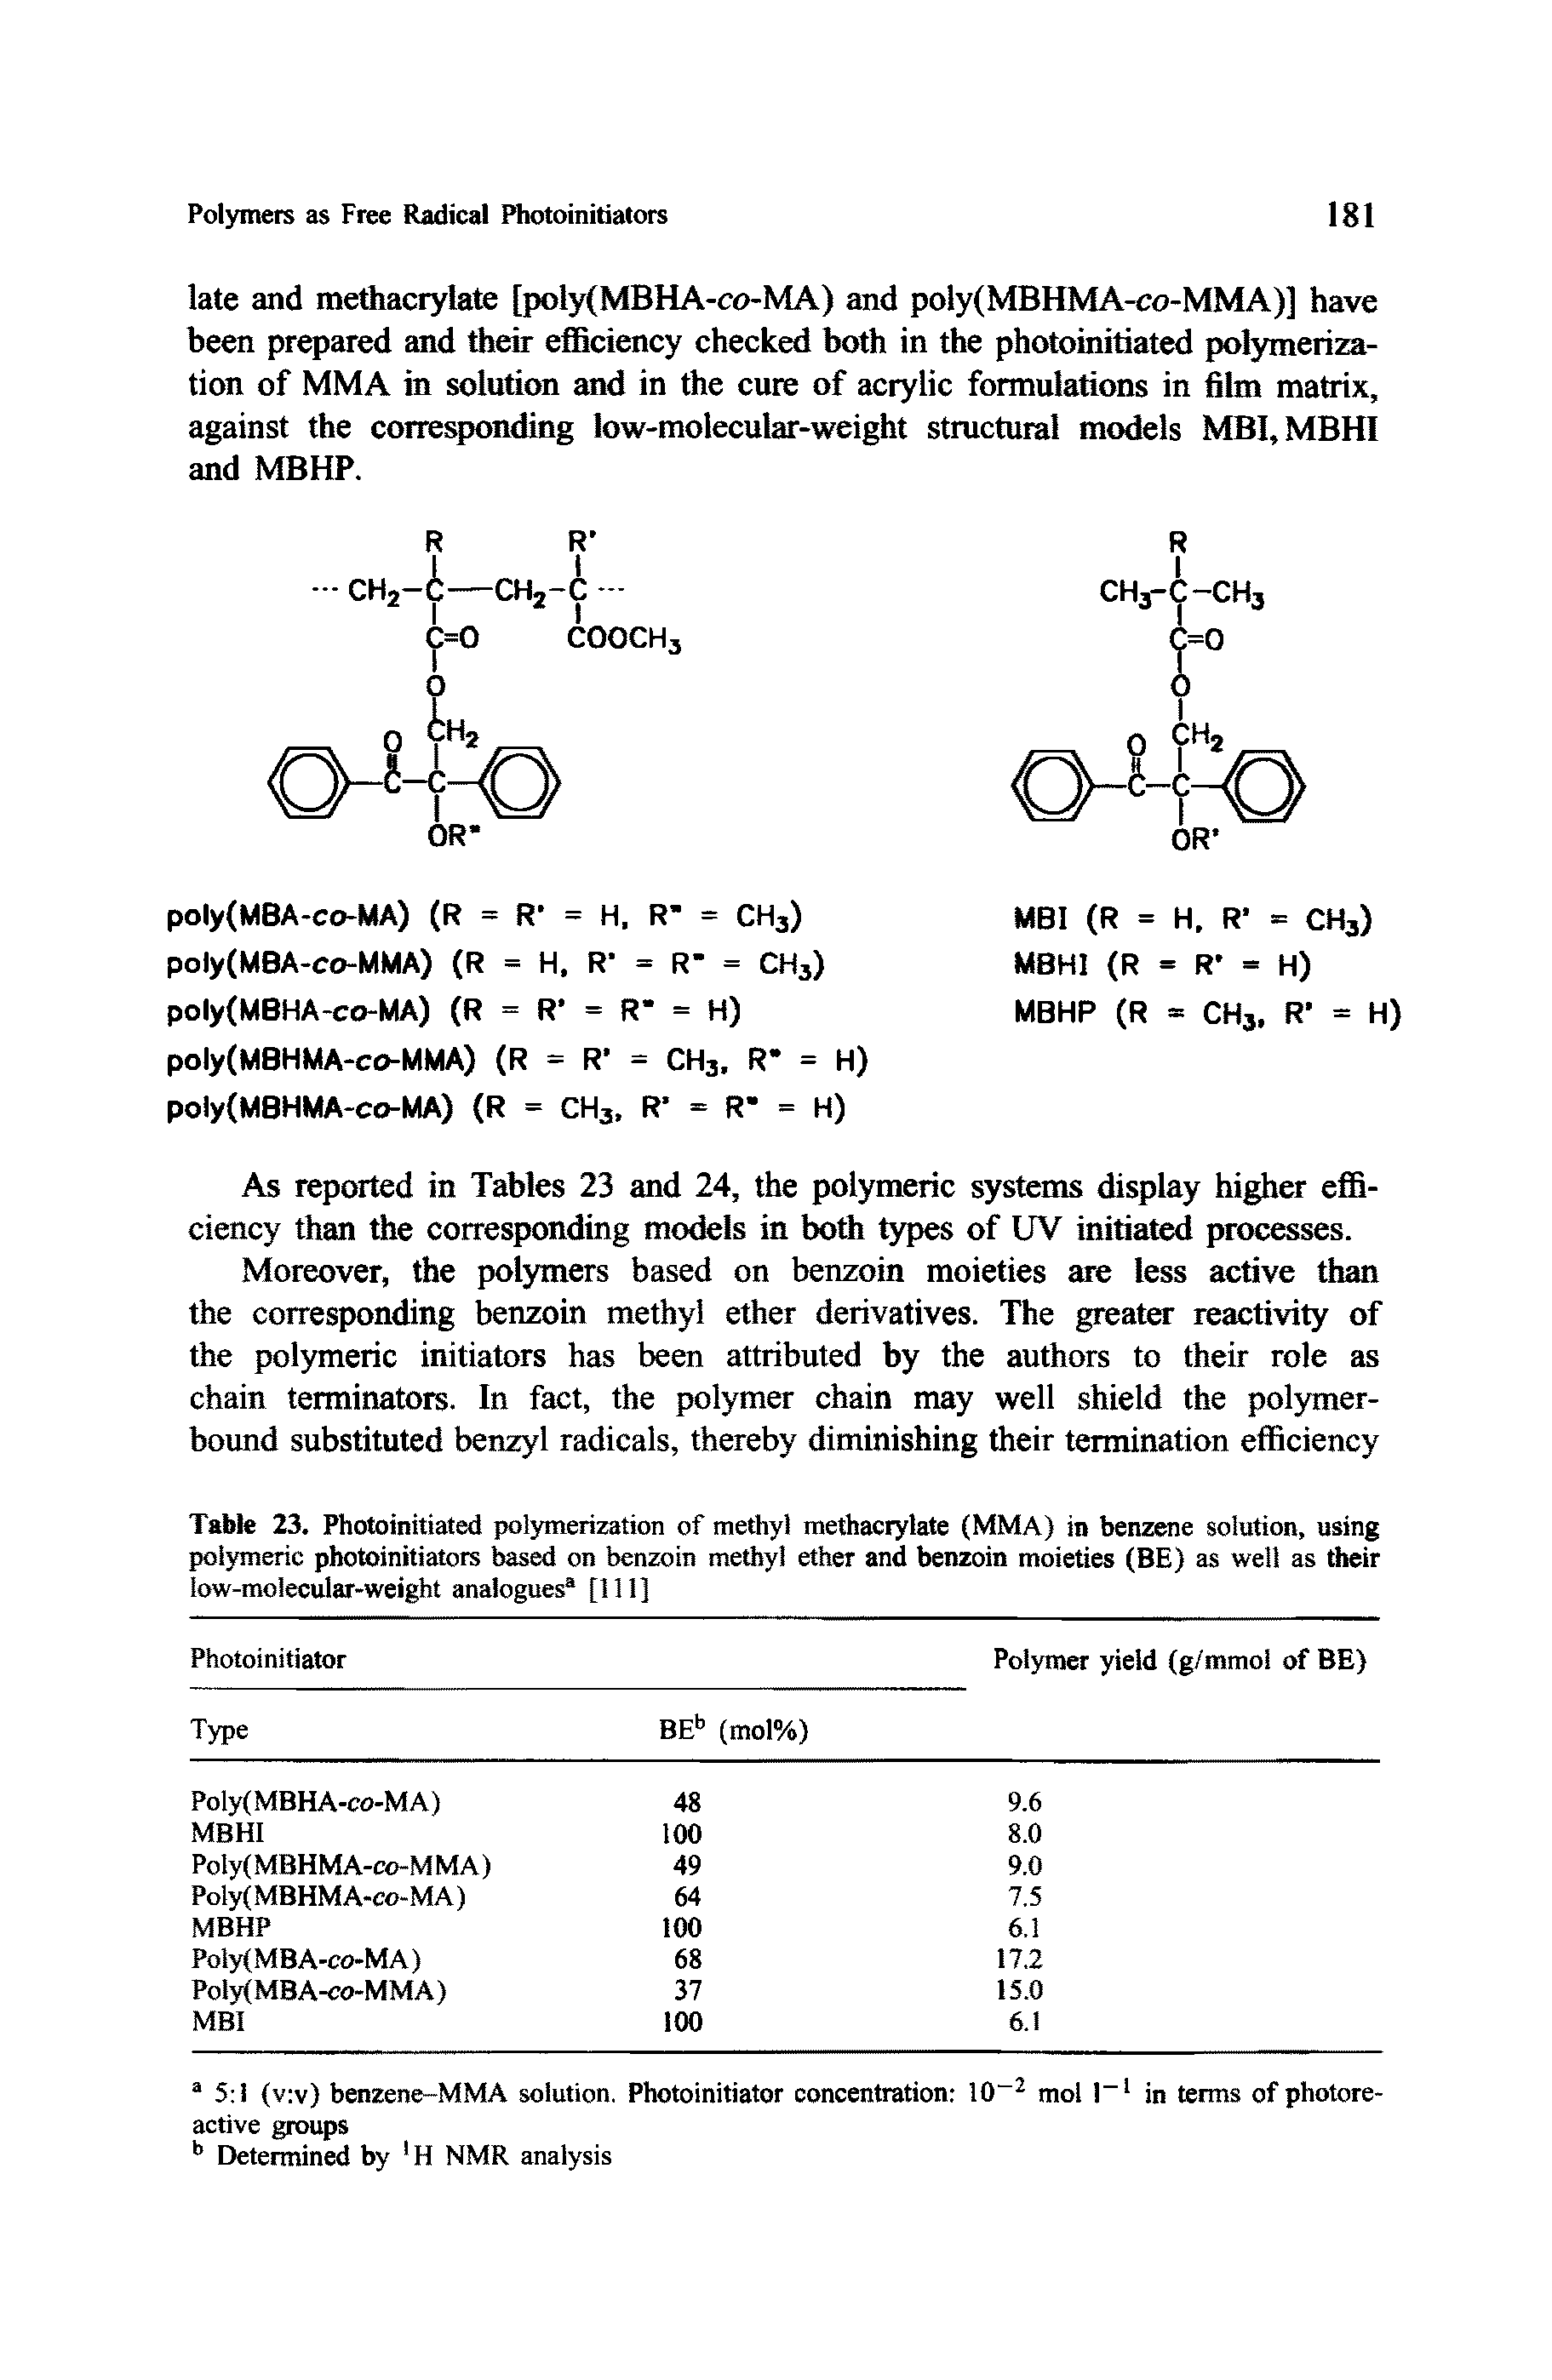 Table 23. Photoinitiated polymerization of methyl methacrylate (MMA) in benzene solution, using polymeric photoinitiators based on benzoin methyl ether and benzoin moieties (BE) as well as their low-molecular-weight analogues [111]...